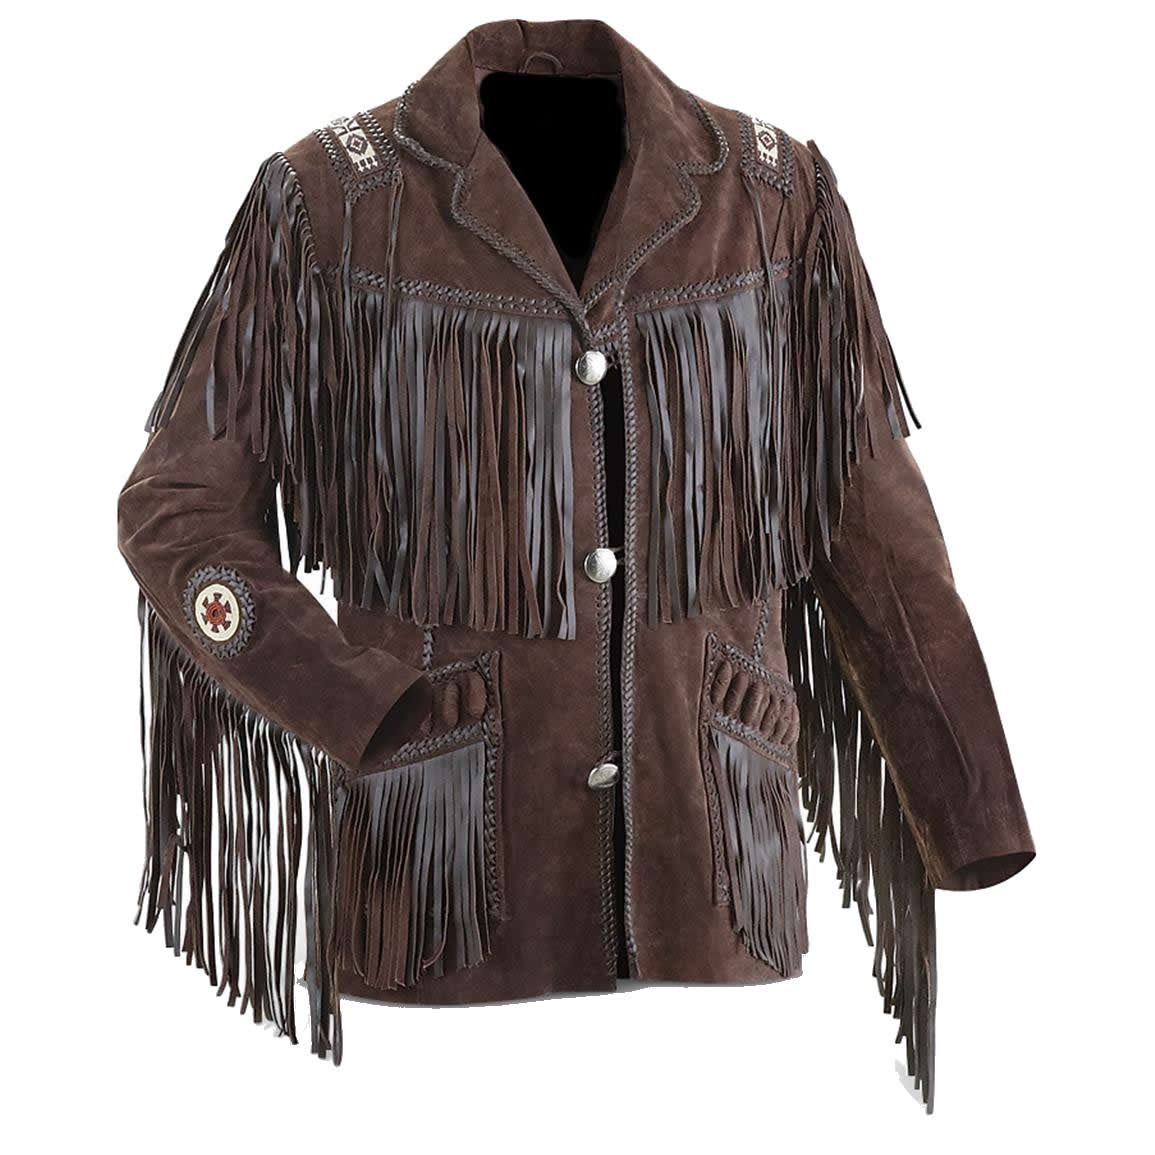 Men's Western cowboy suede leather jacket with Fringes